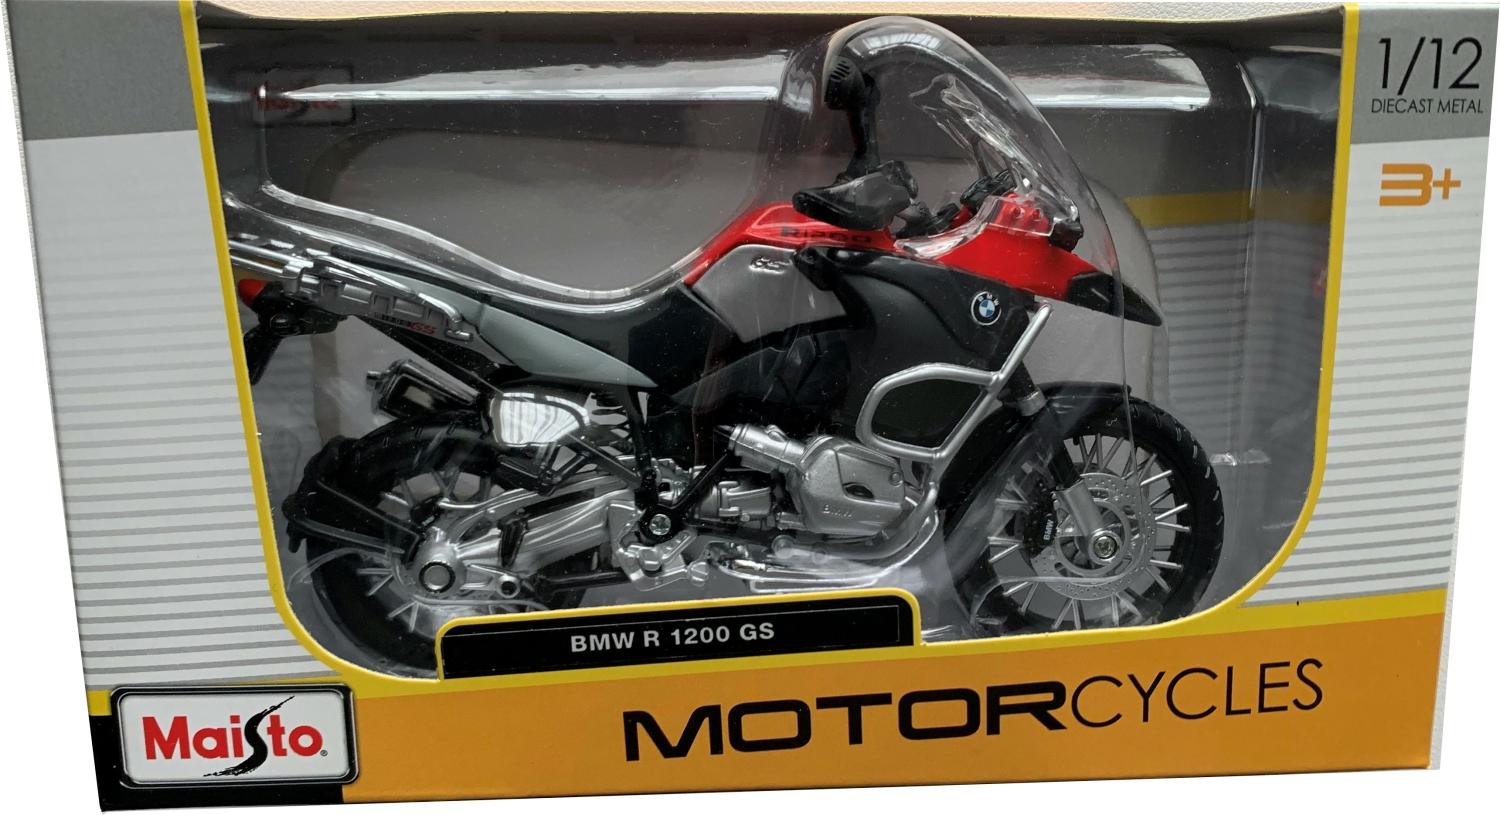 BMW R 1200 GS in red / silver 1:12 scale model from Maisto